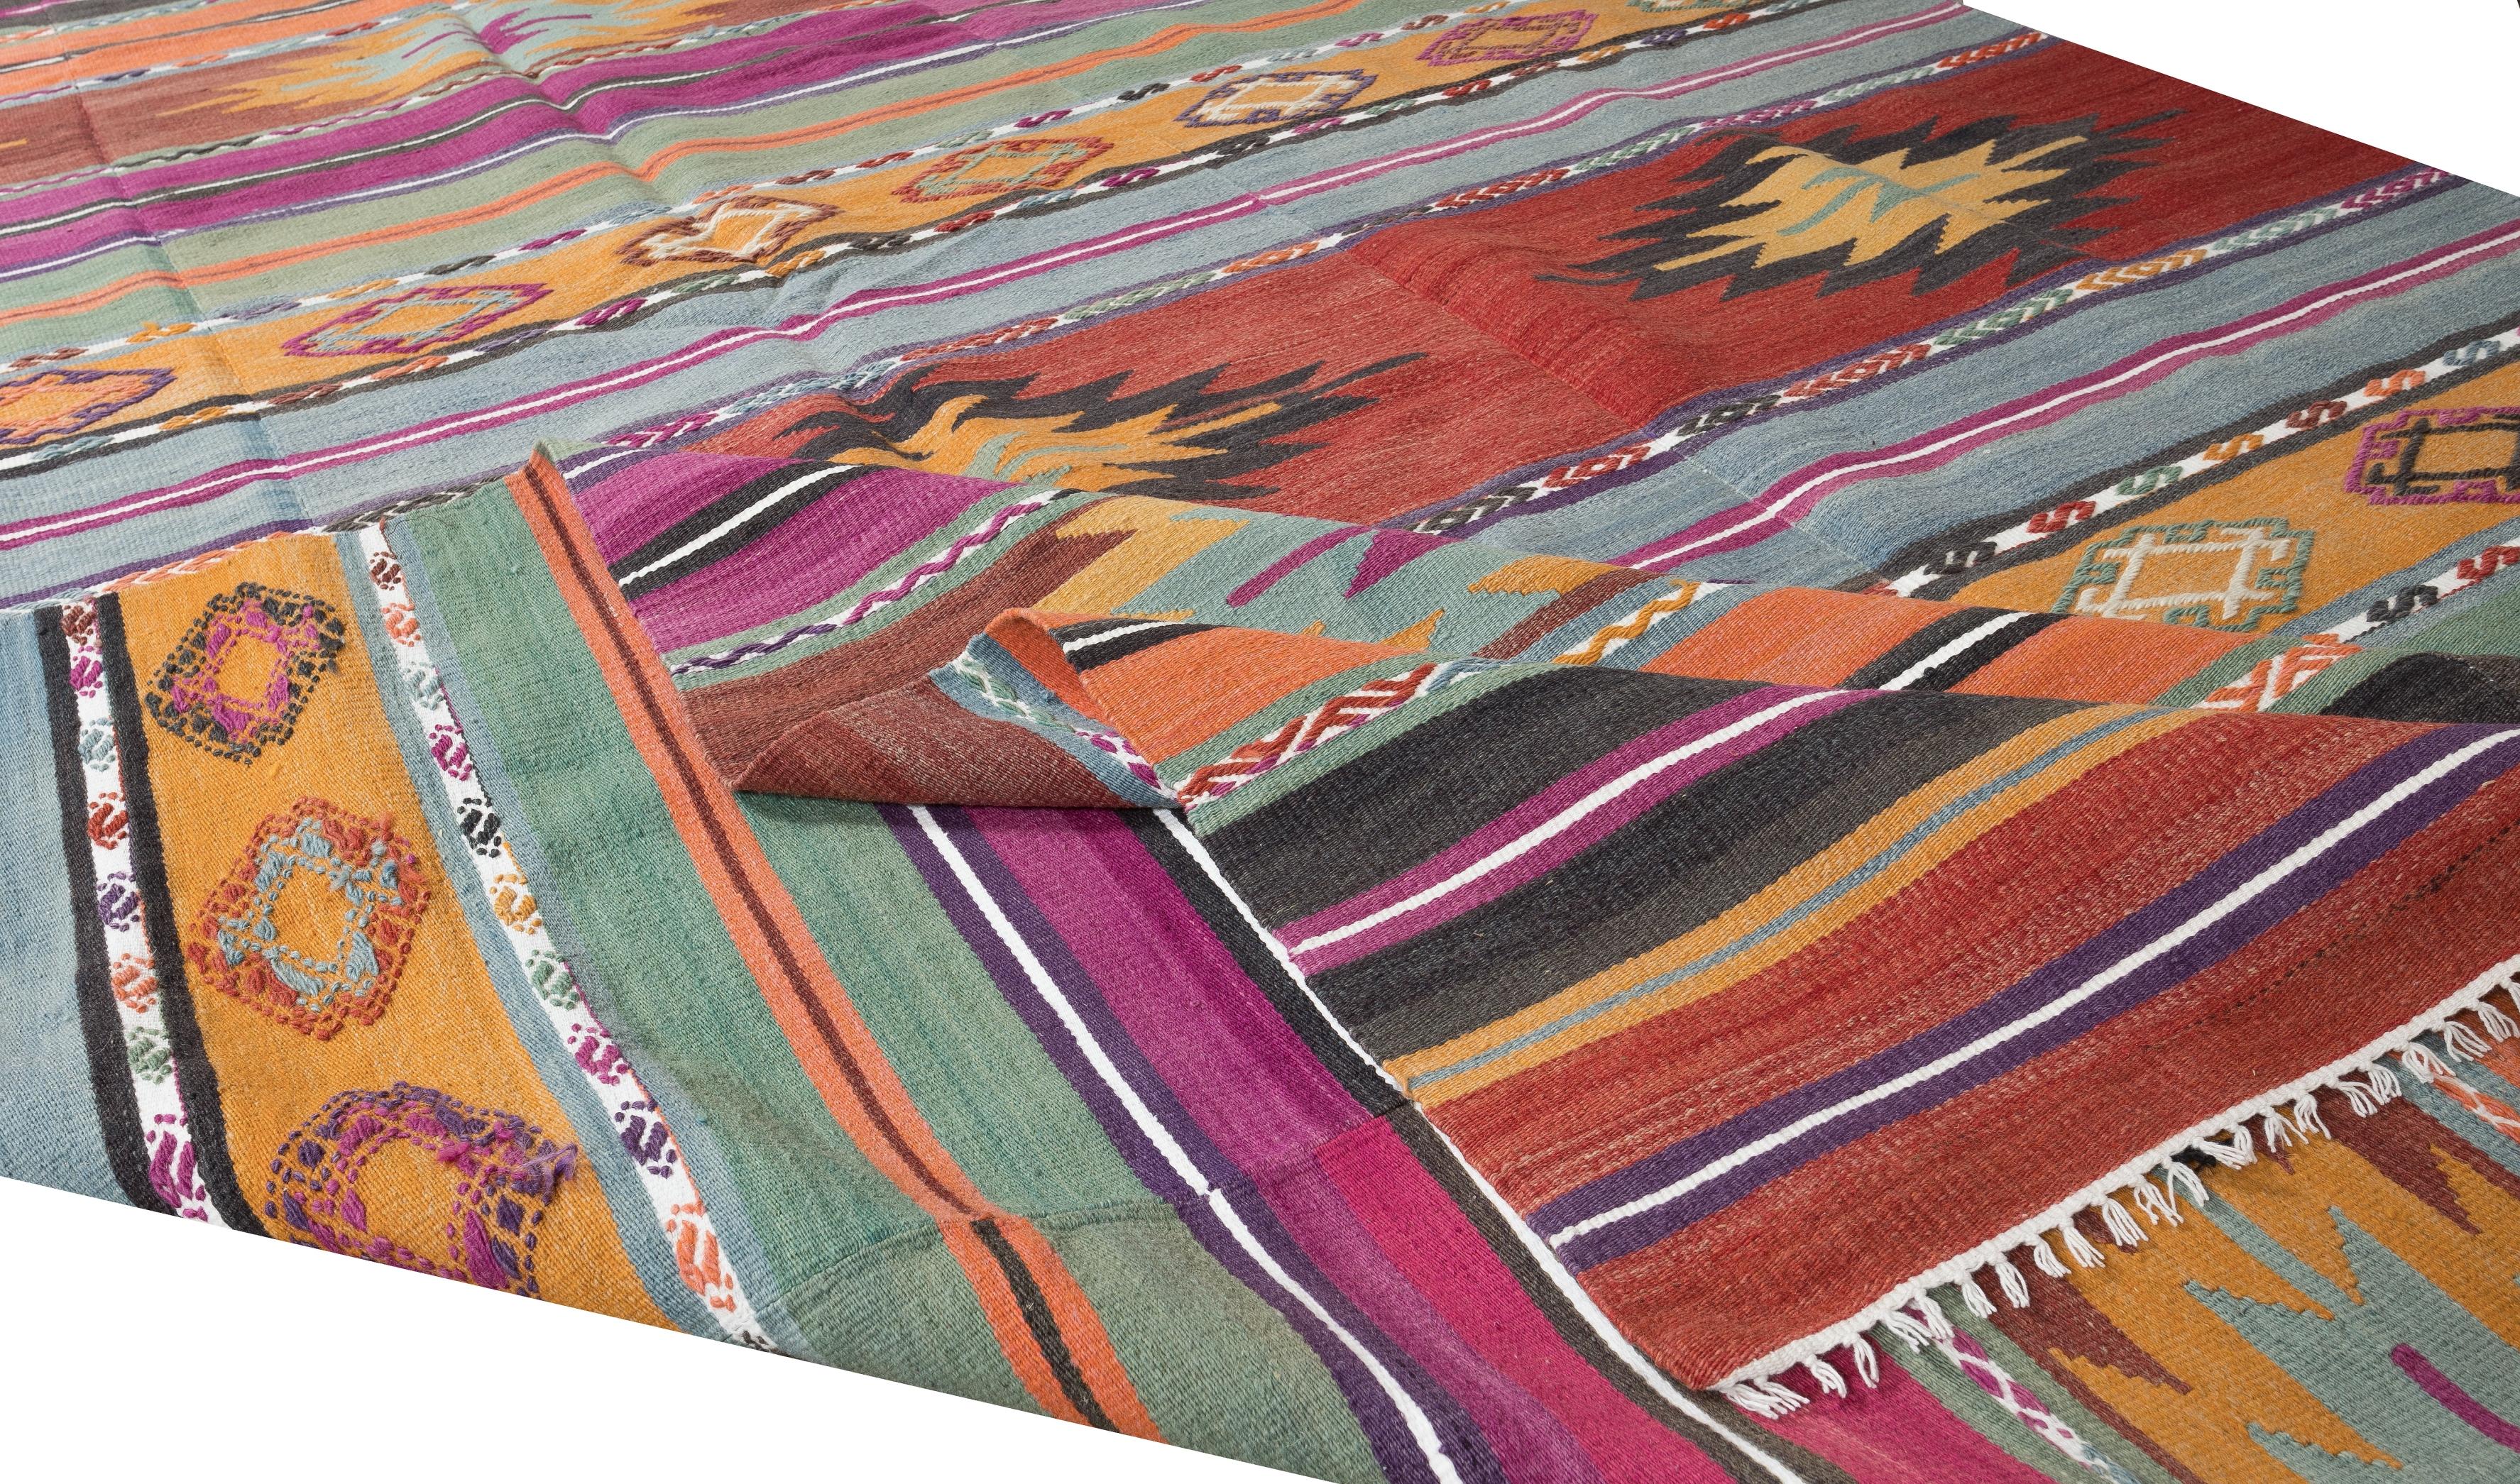 Hand-Woven 5.8x9.3 Ft Vintage Hand Woven Kilim, Colorful Rug, Turkish Carpet, 100% Wool For Sale